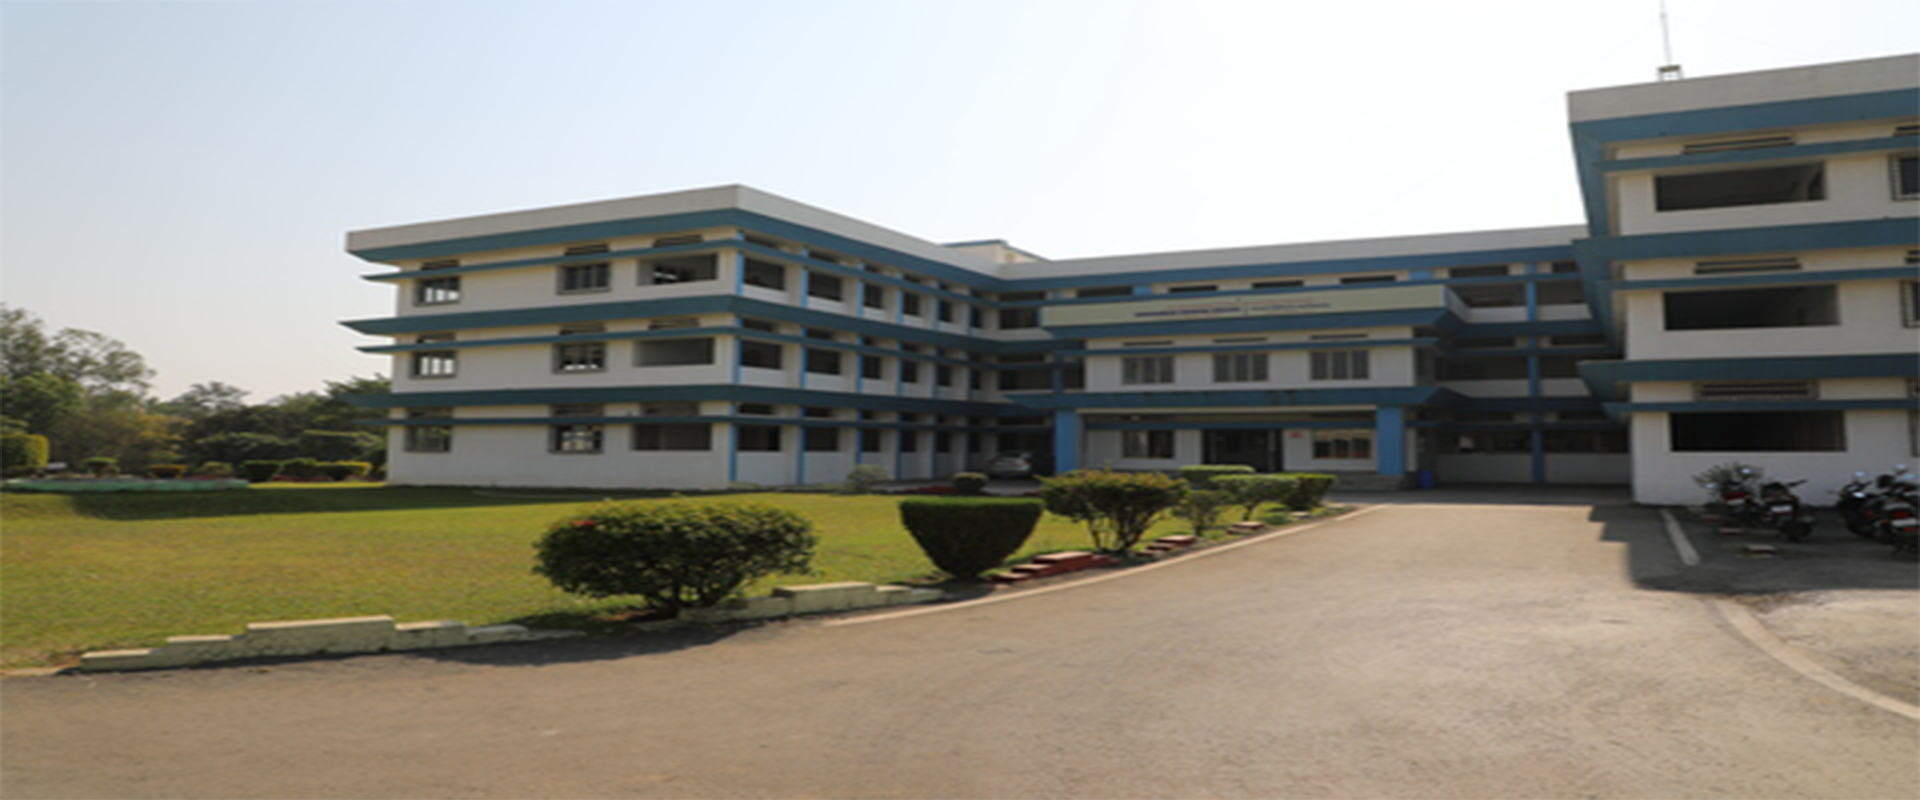 National Modern Medical Education and Research Institute